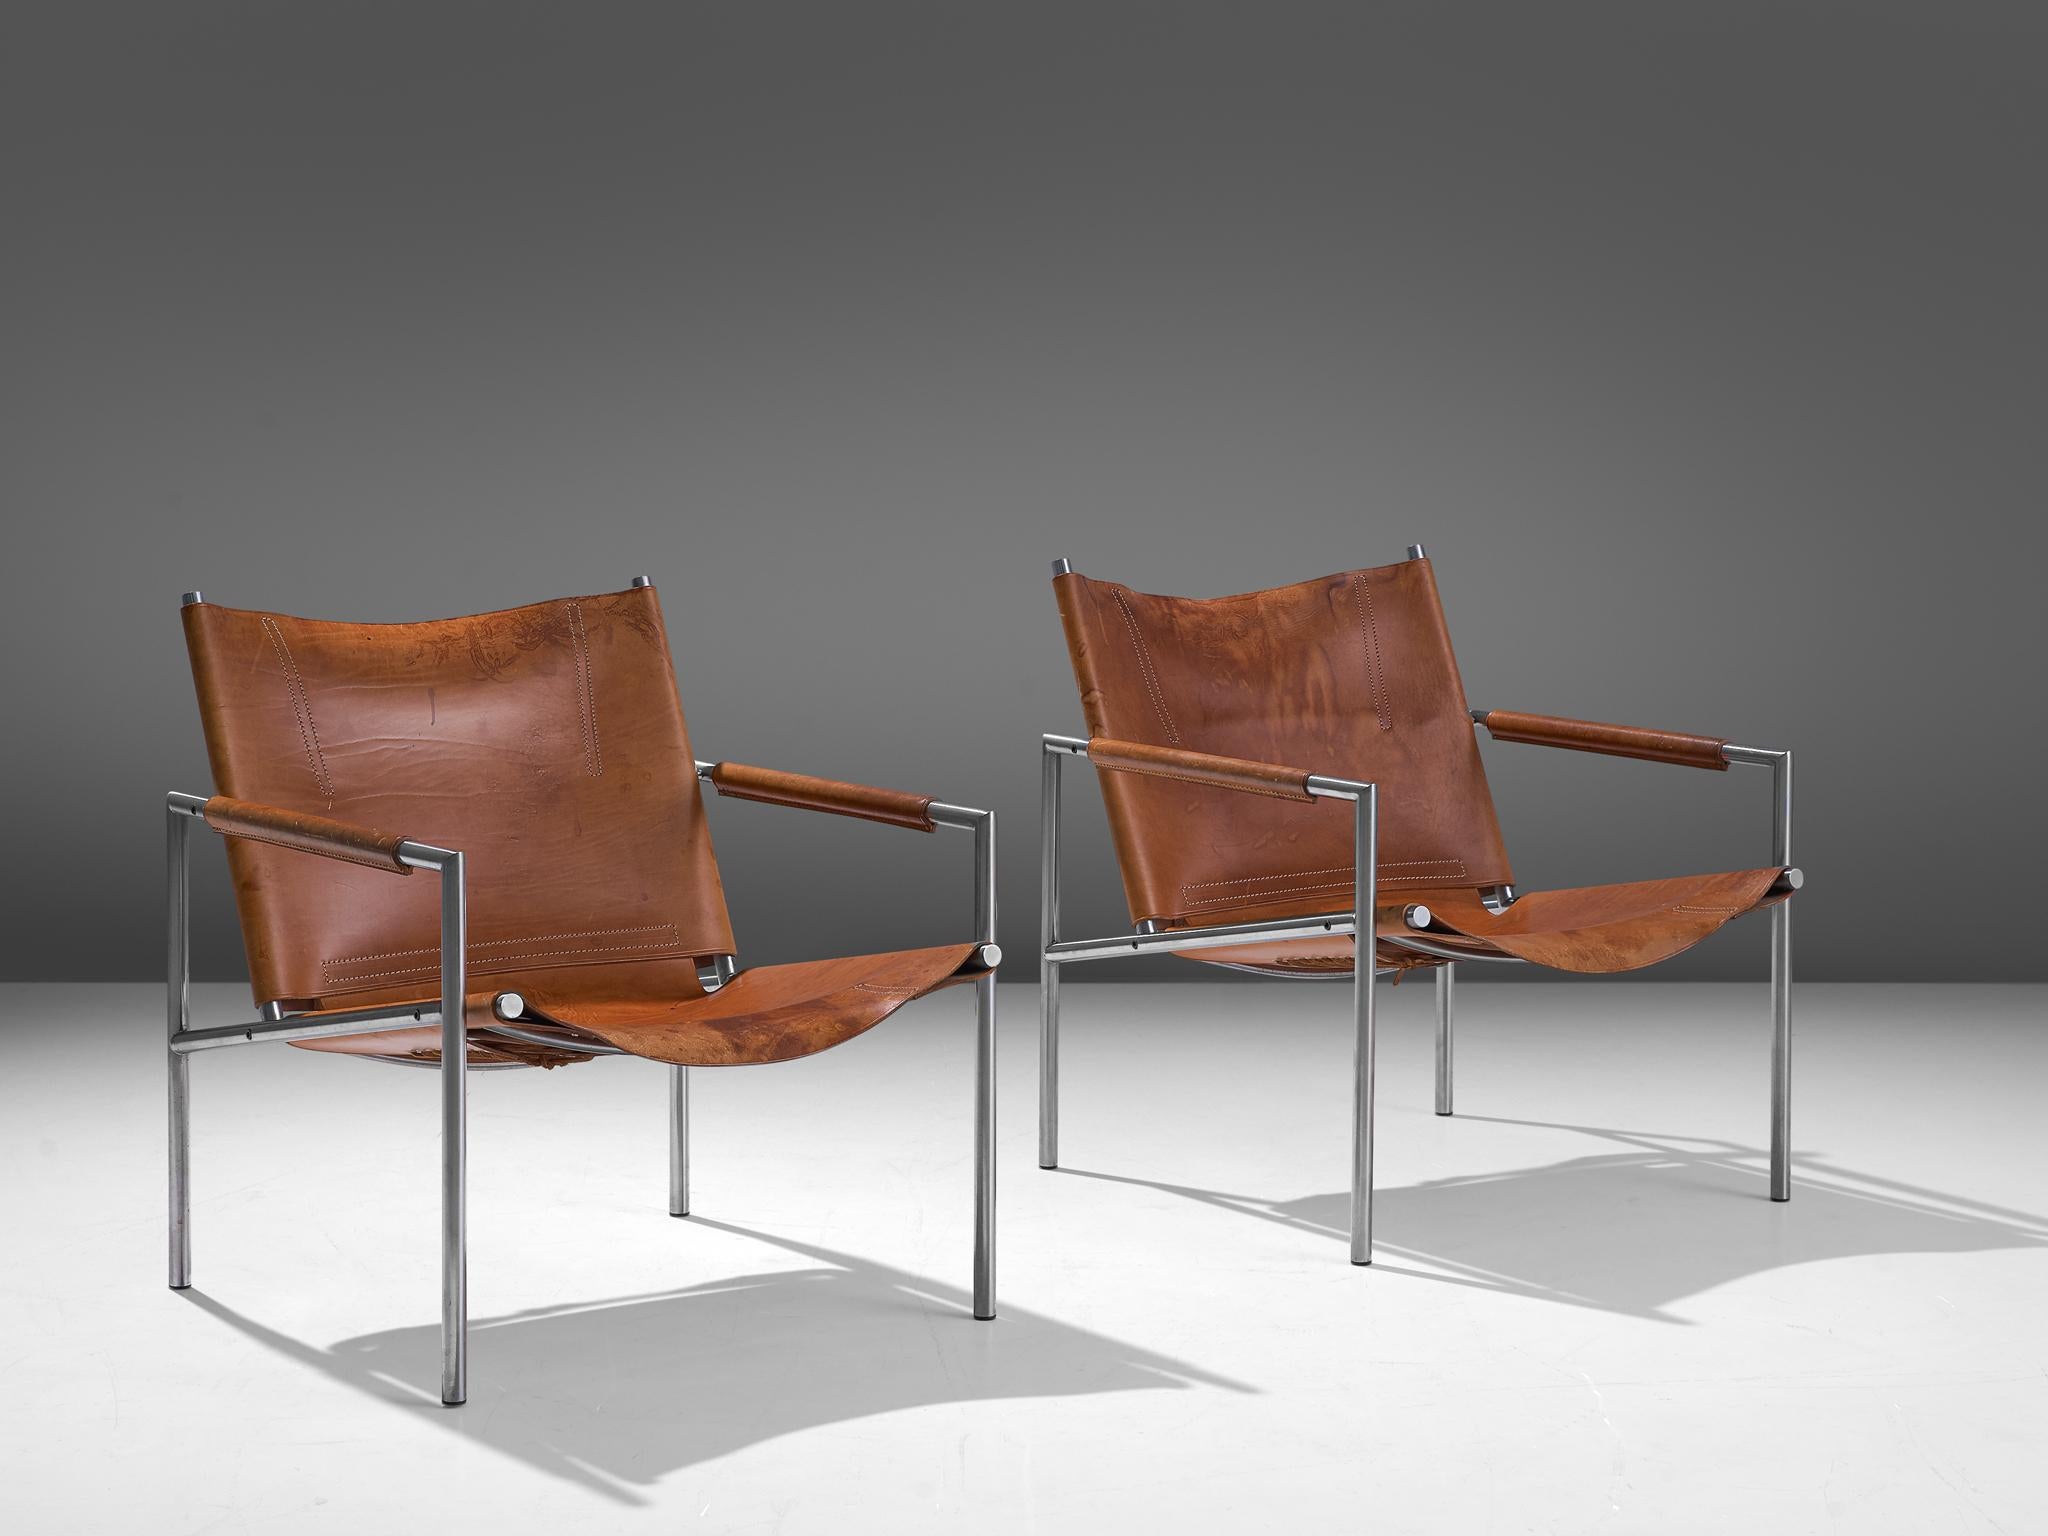 Martin Visser, pair of armchairs, leather and metal, The Netherlands, 1965.

These modern, Minimalist easy chairs are executed with a tubular brushed steel frame in combination with soft, patinated cognac leather upholstery. The armrests are